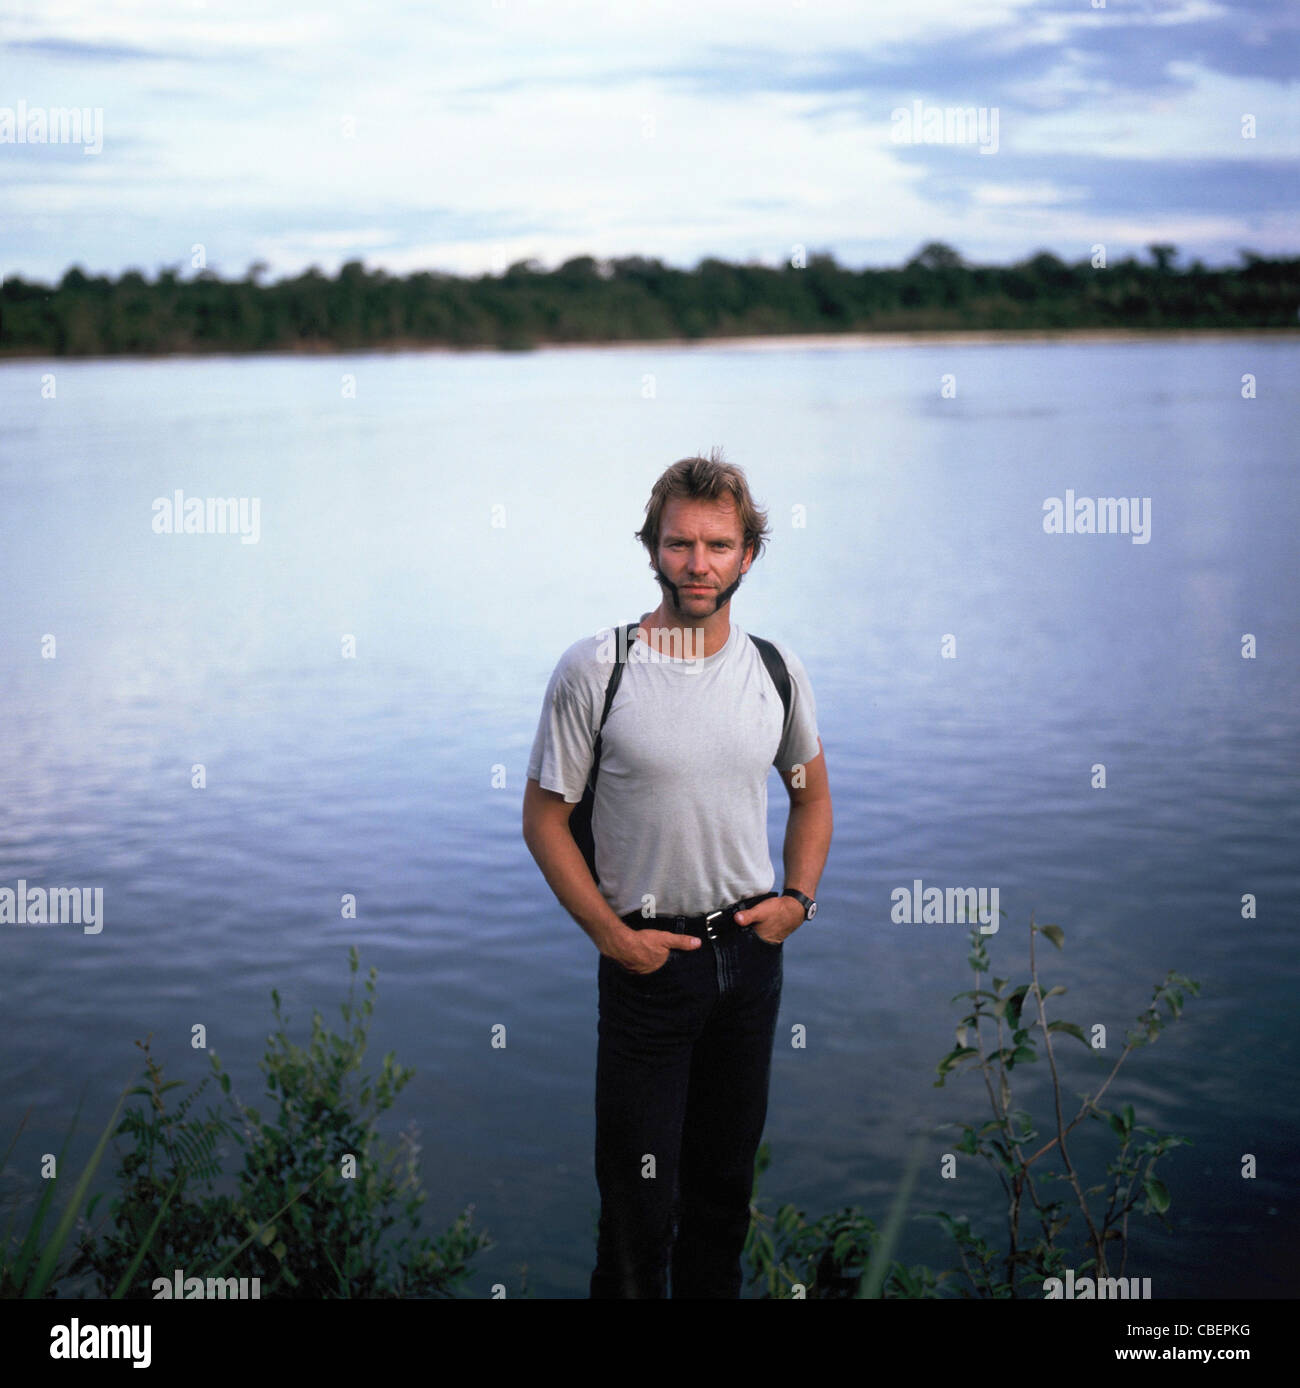 Xingu River, Brazil. Sting with intricate face paint standing on the shores of the Xingu River. Stock Photo